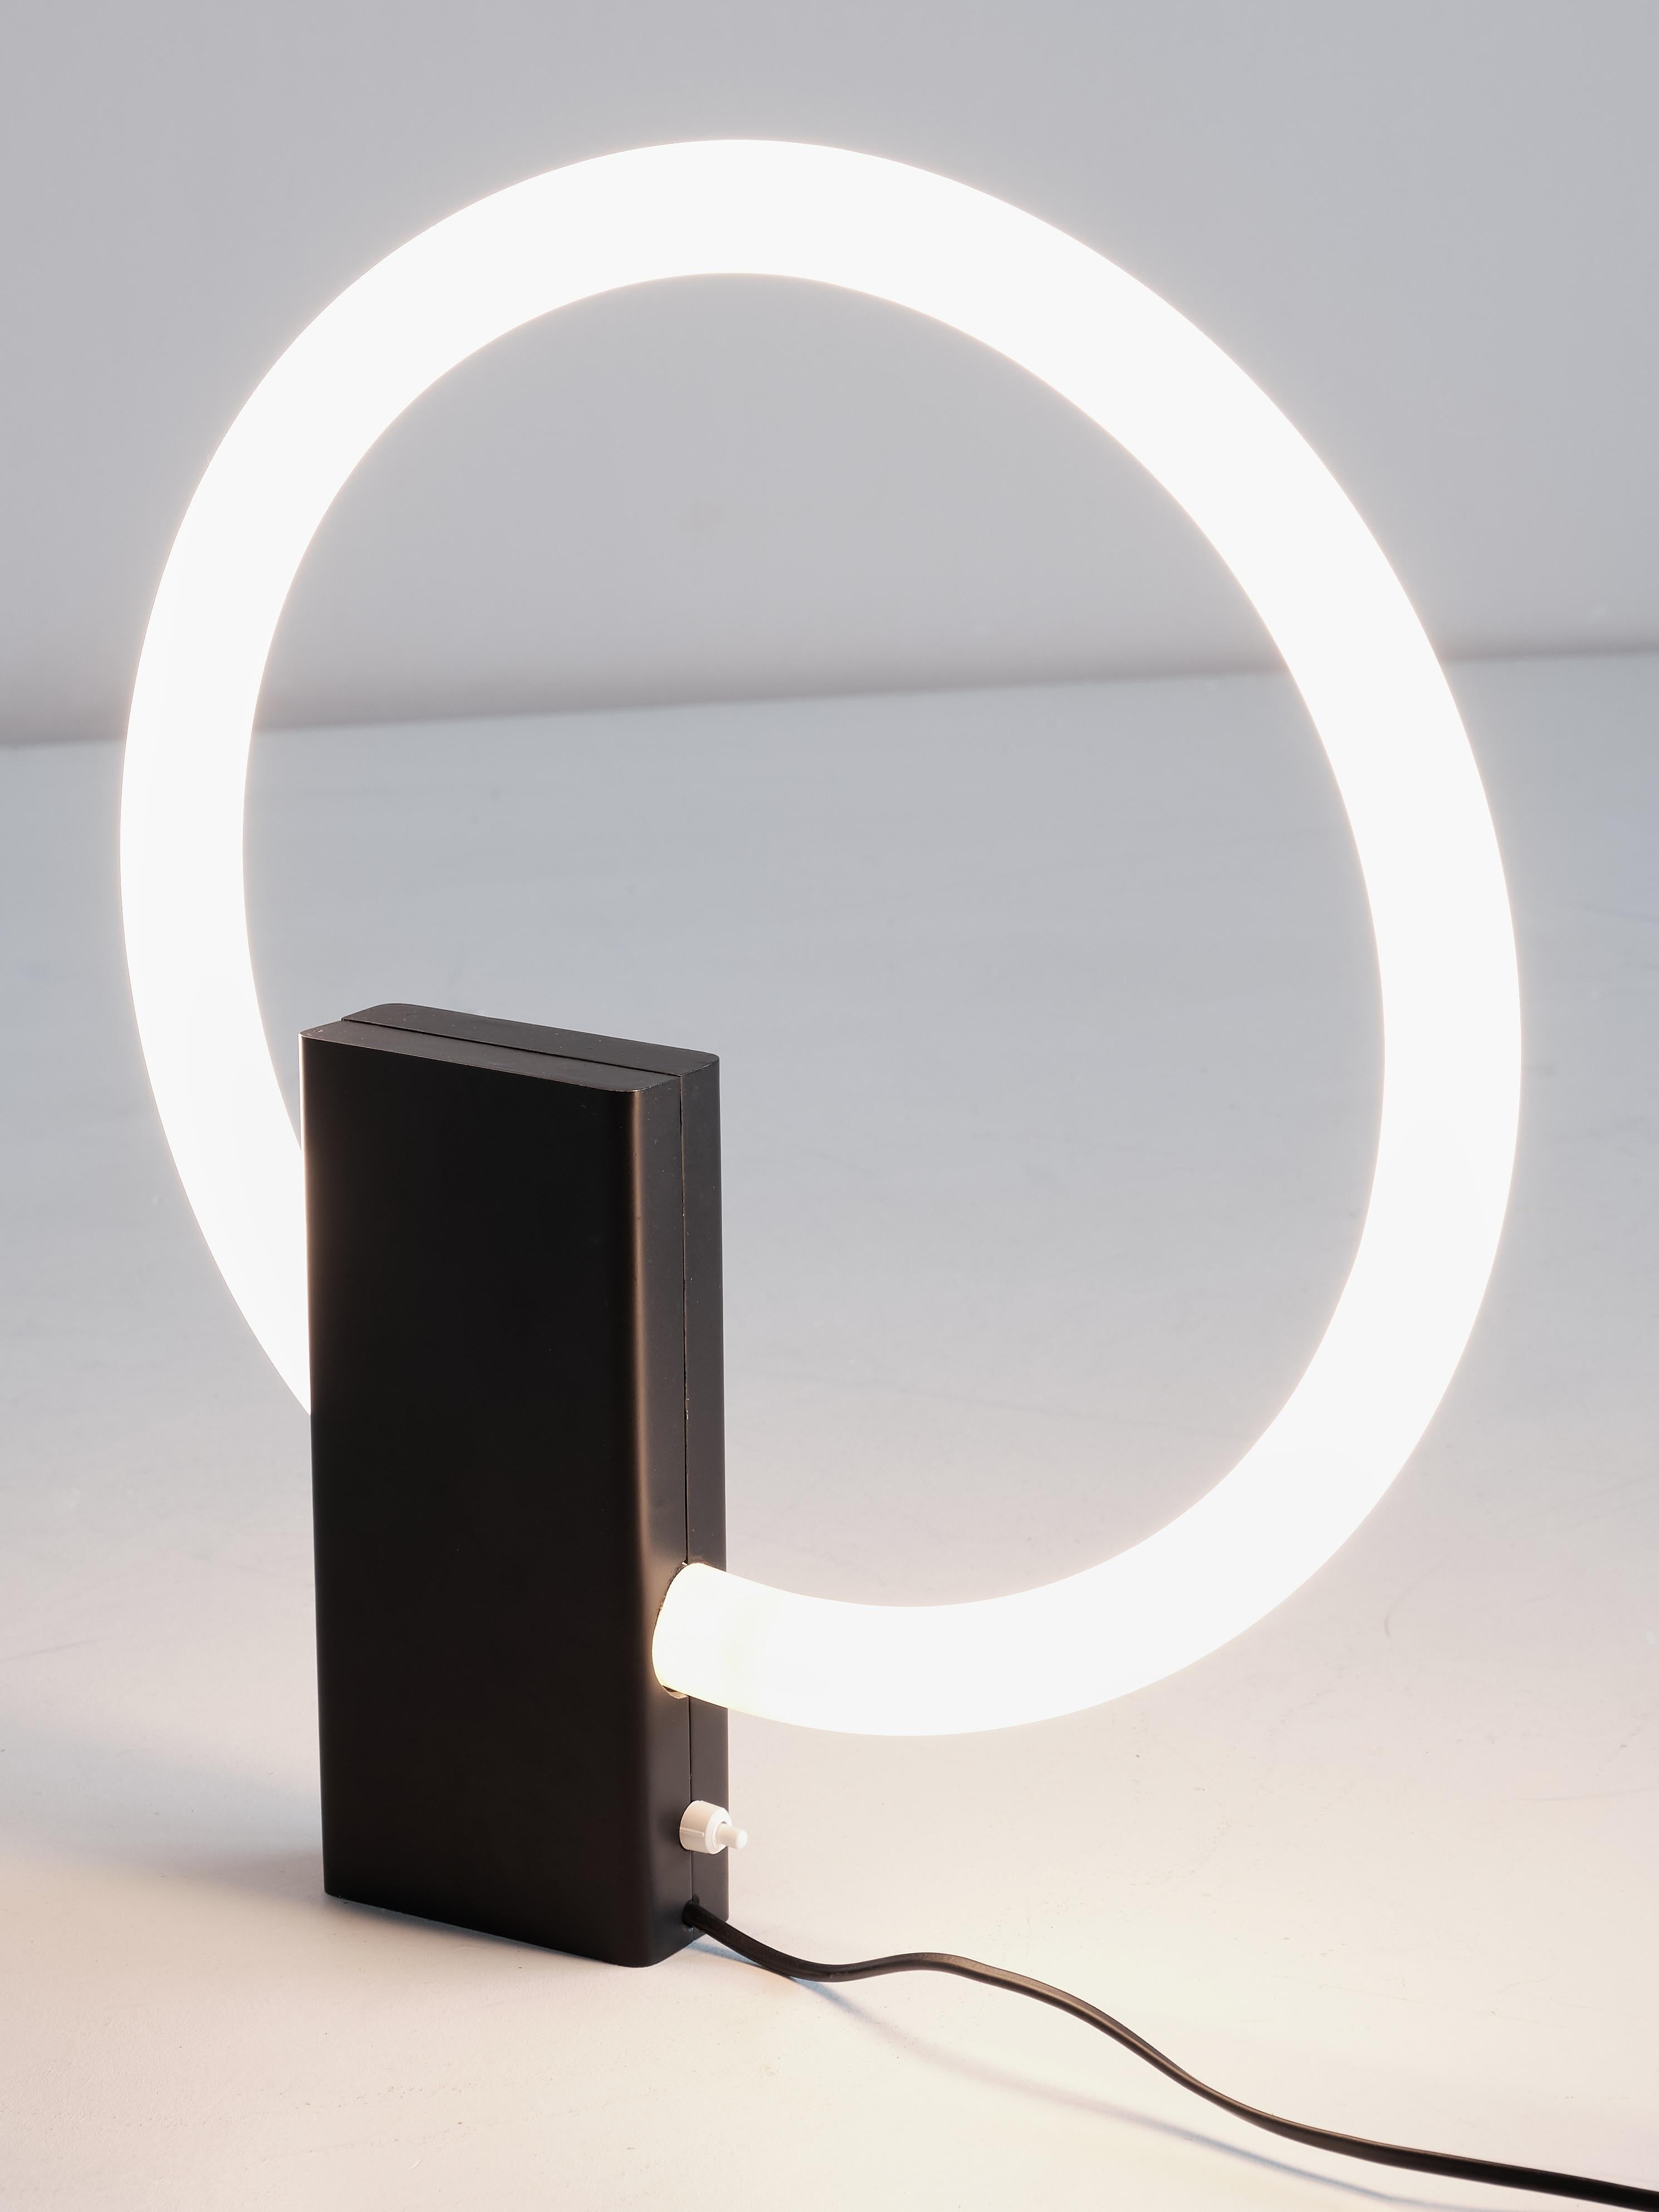 Minimalist Circular Tube Table Lamp with Black Steel Base, Netherlands, 1970s For Sale 1